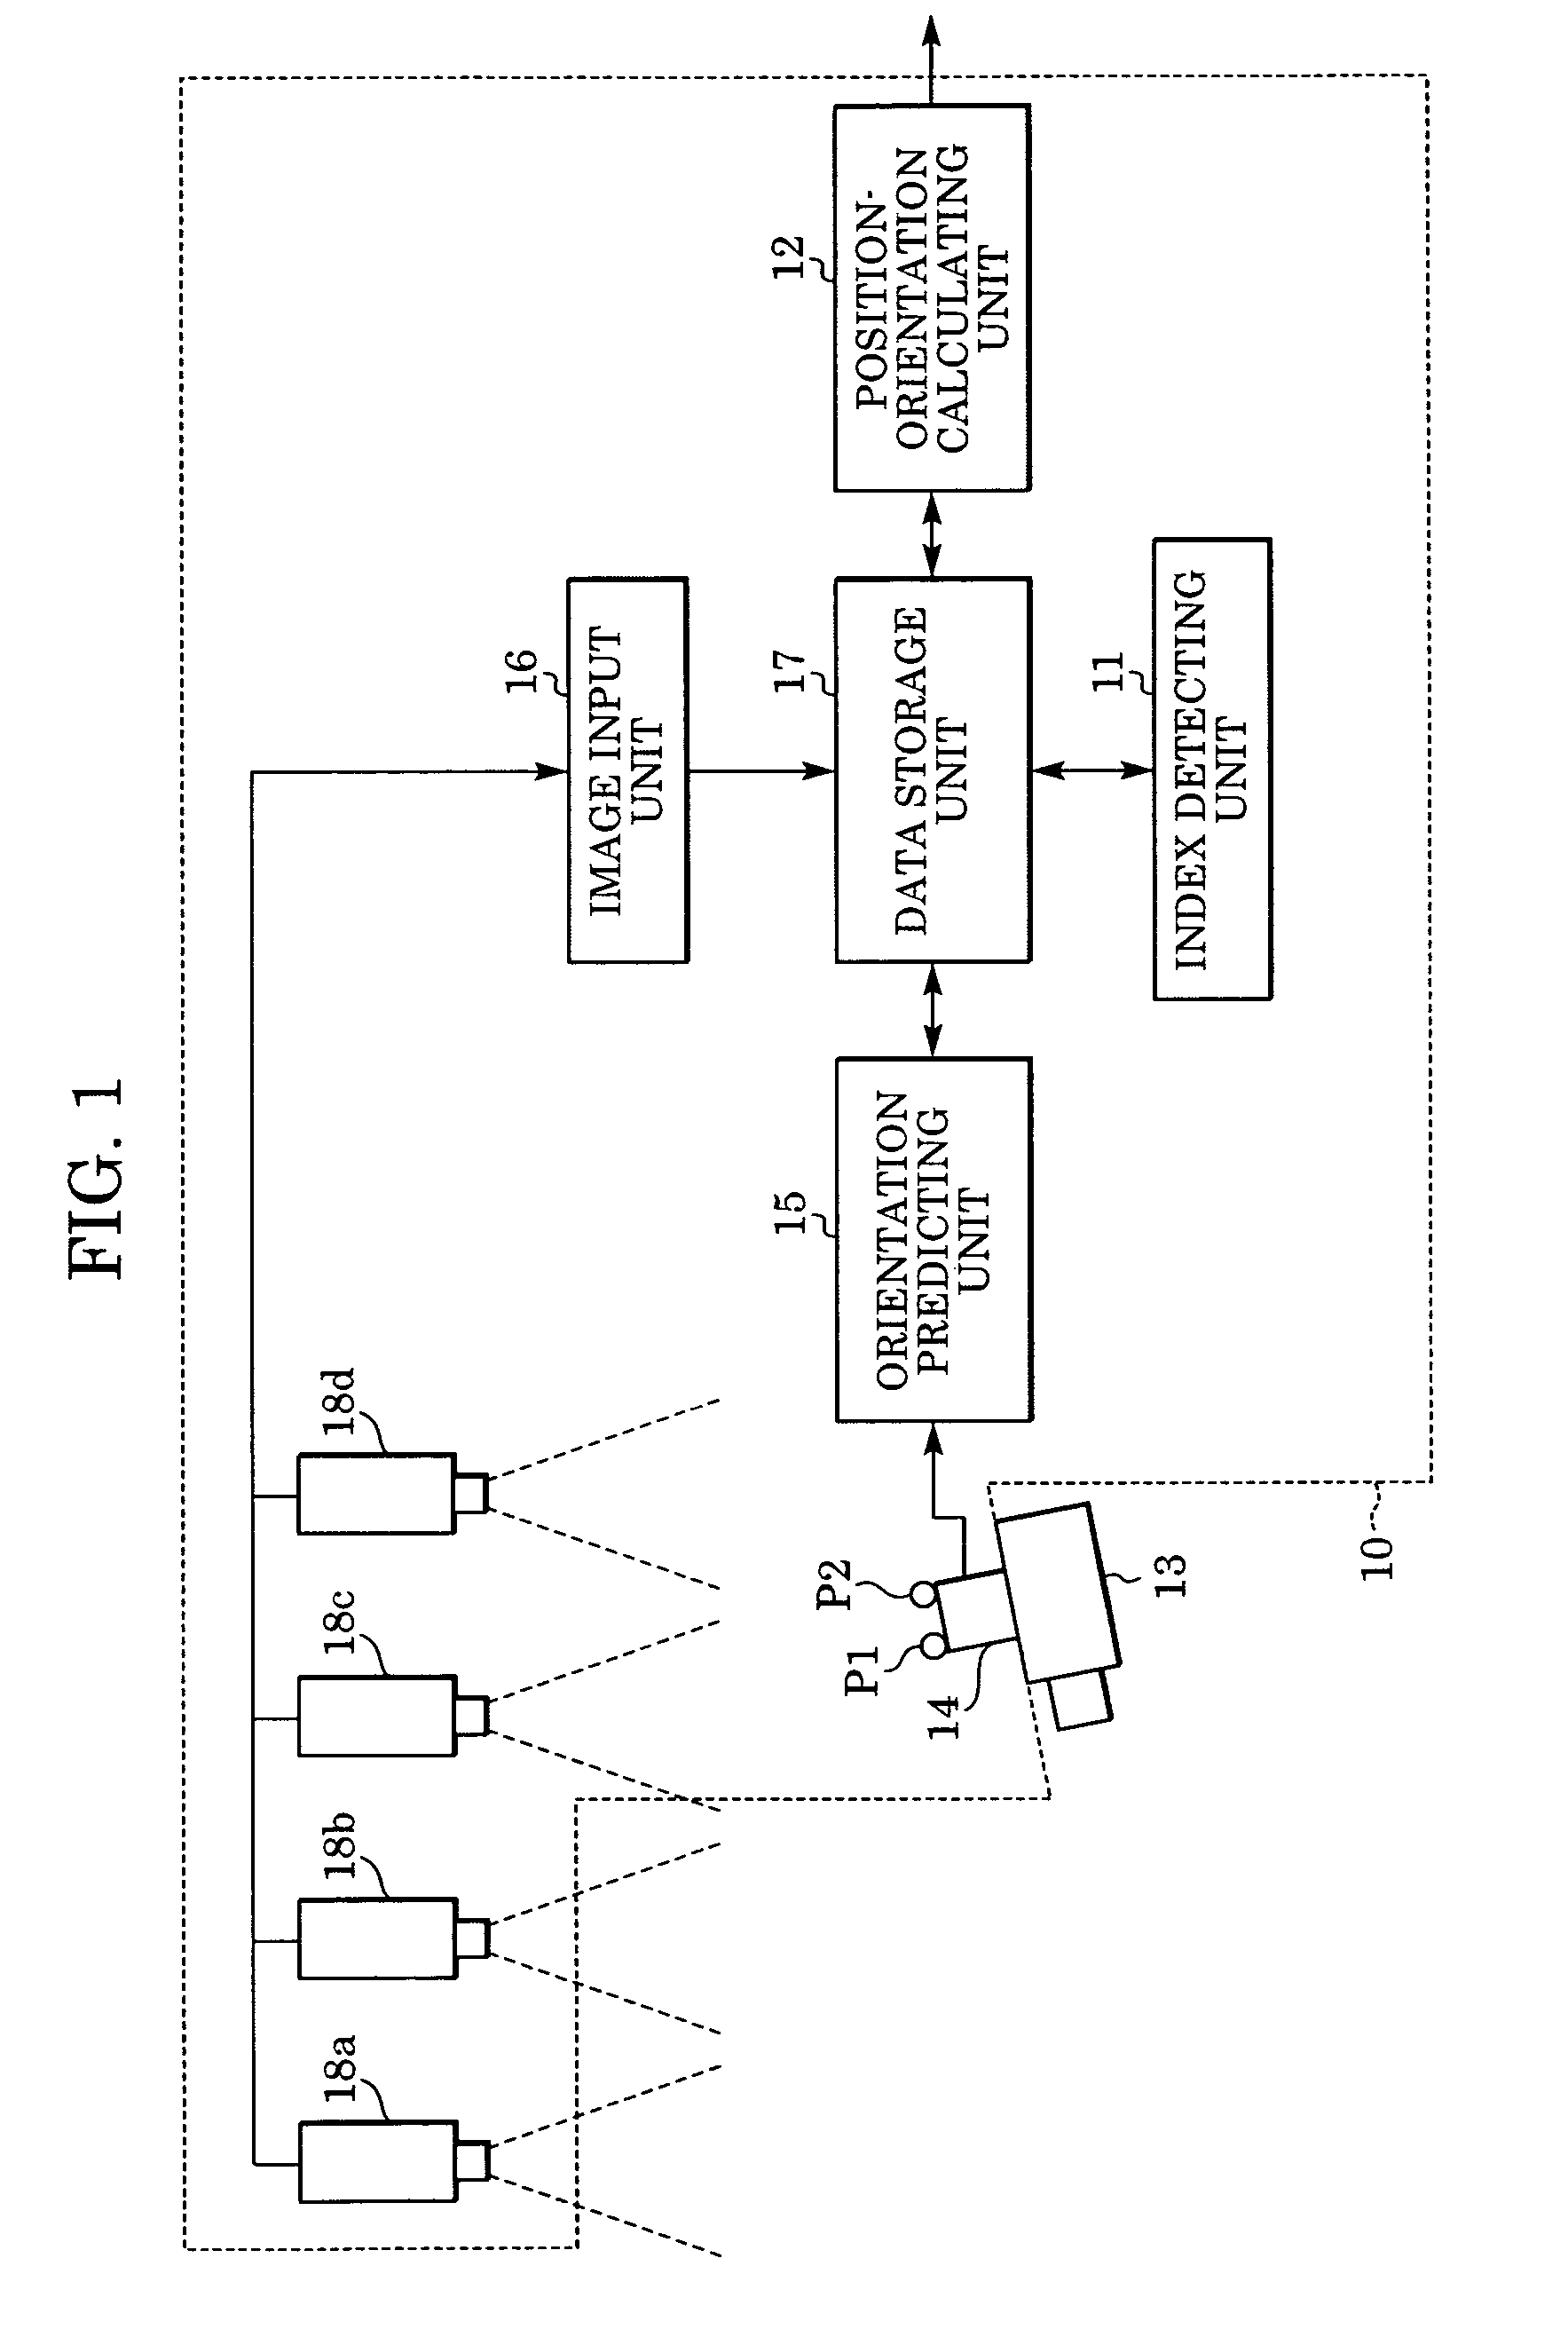 Information processing method and apparatus for finding position and orientation of targeted object